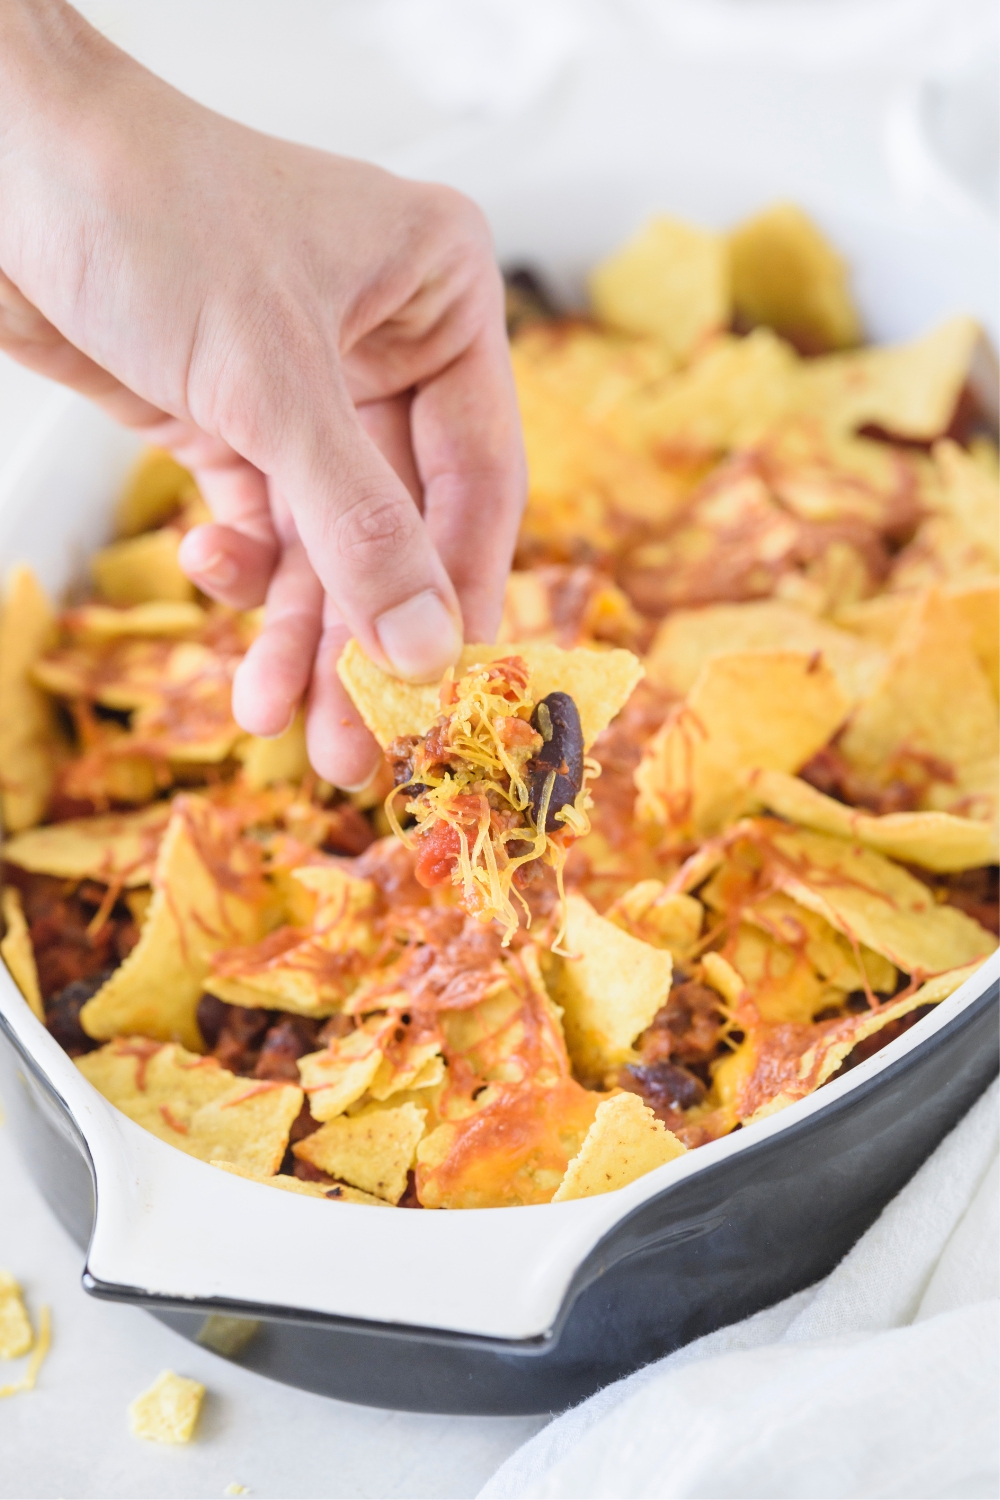 A baking pan with taco casserole a hand is holding a chip piled with taco casserole on it.